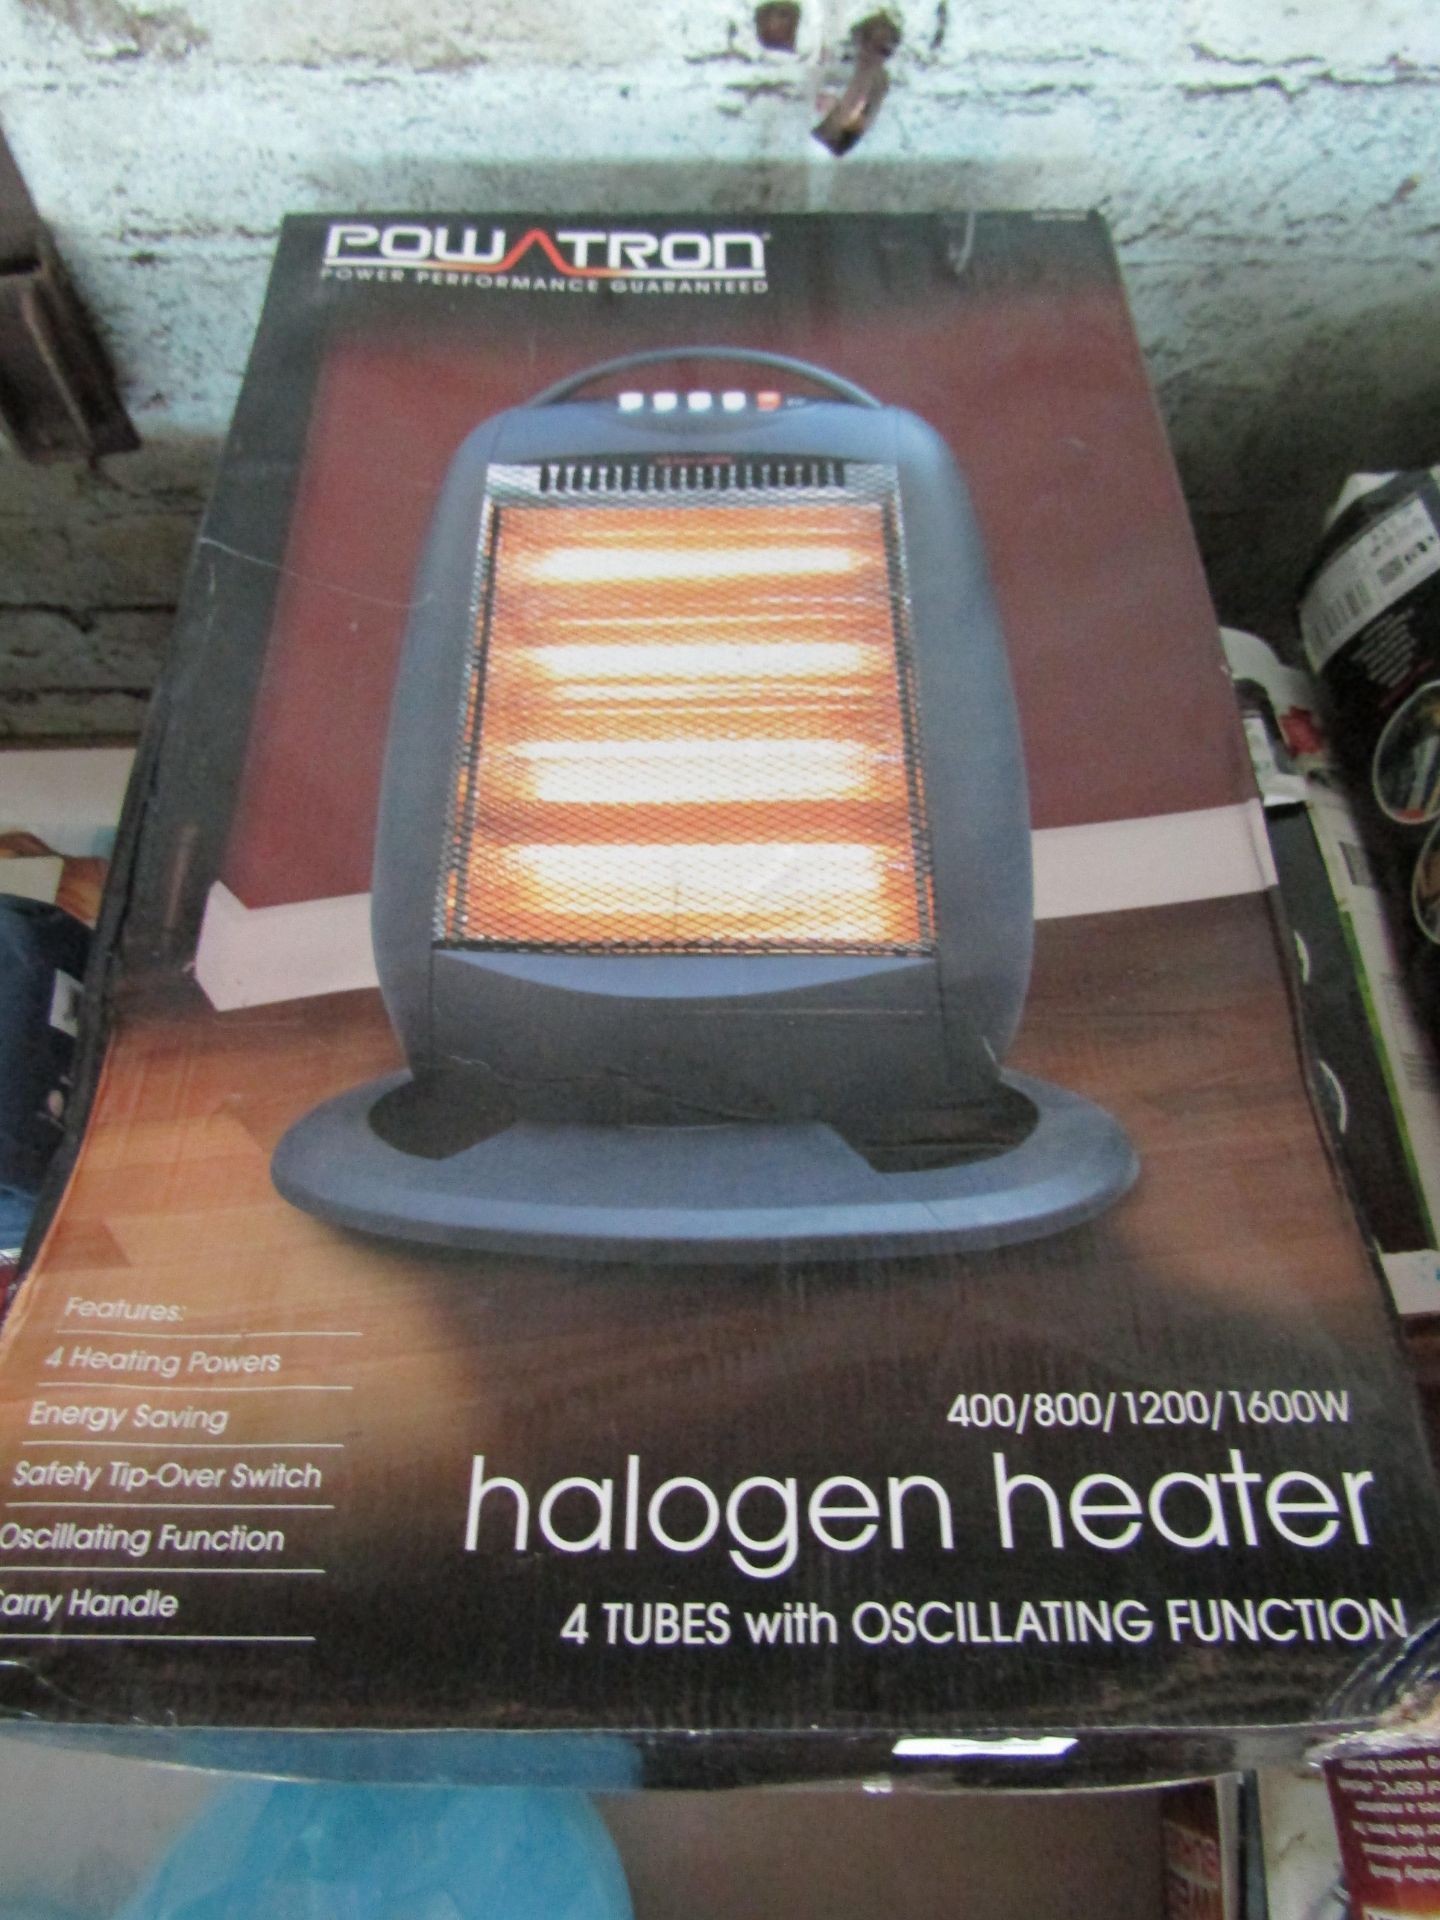 2x Powatron - Halogen Heaters 1600w Max - Unchecked, Boxes May Be Damaged.